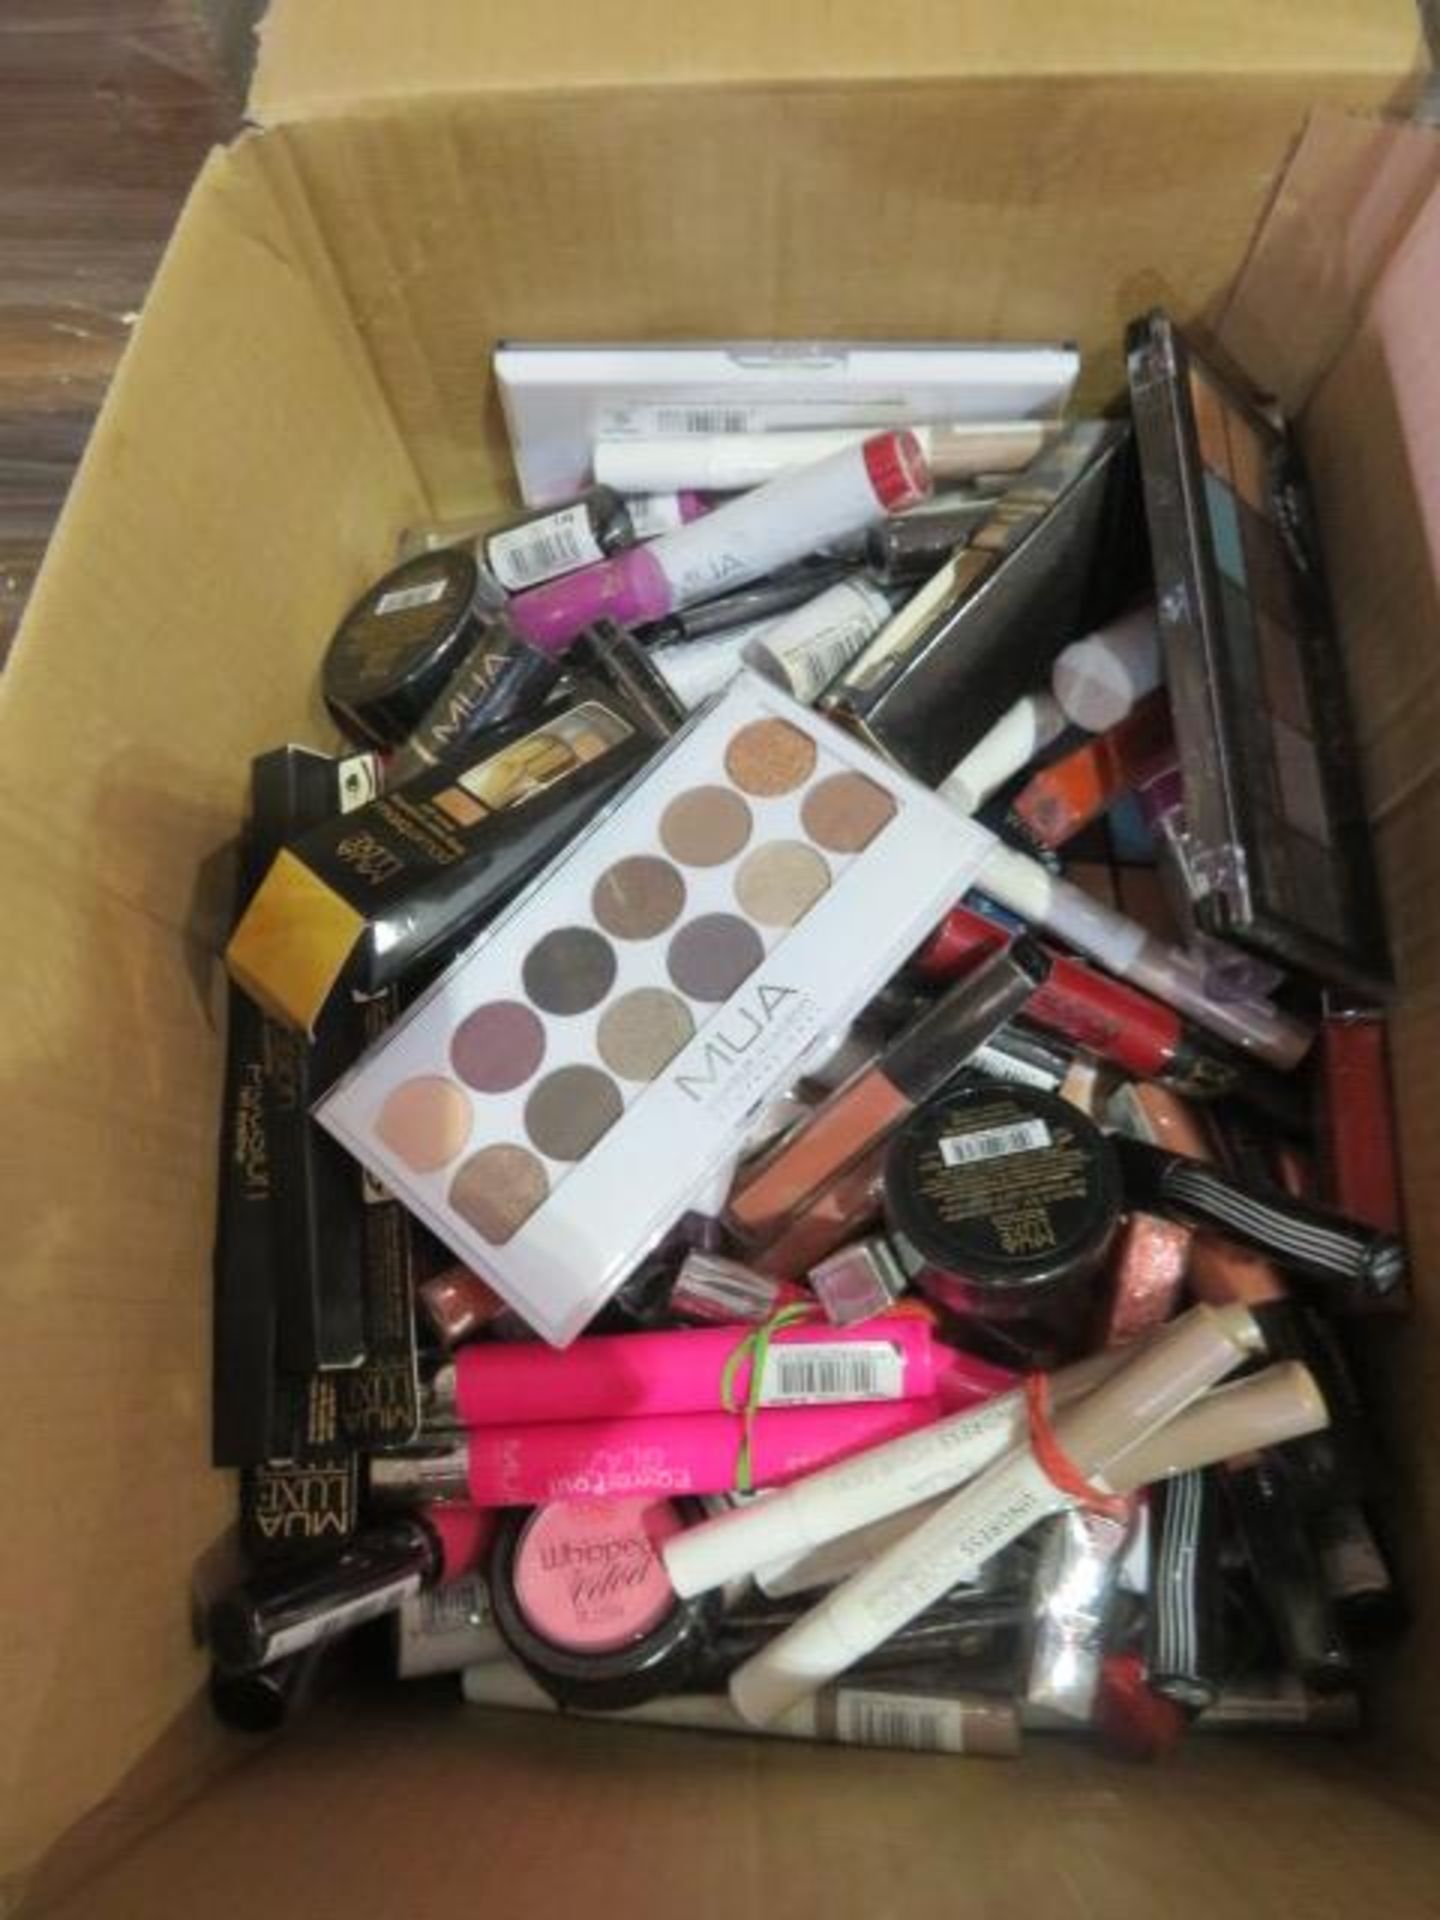 (Z13) Circa. 200 items of various new make up acadamy make up to include: lipstick, power brow ... - Image 3 of 3